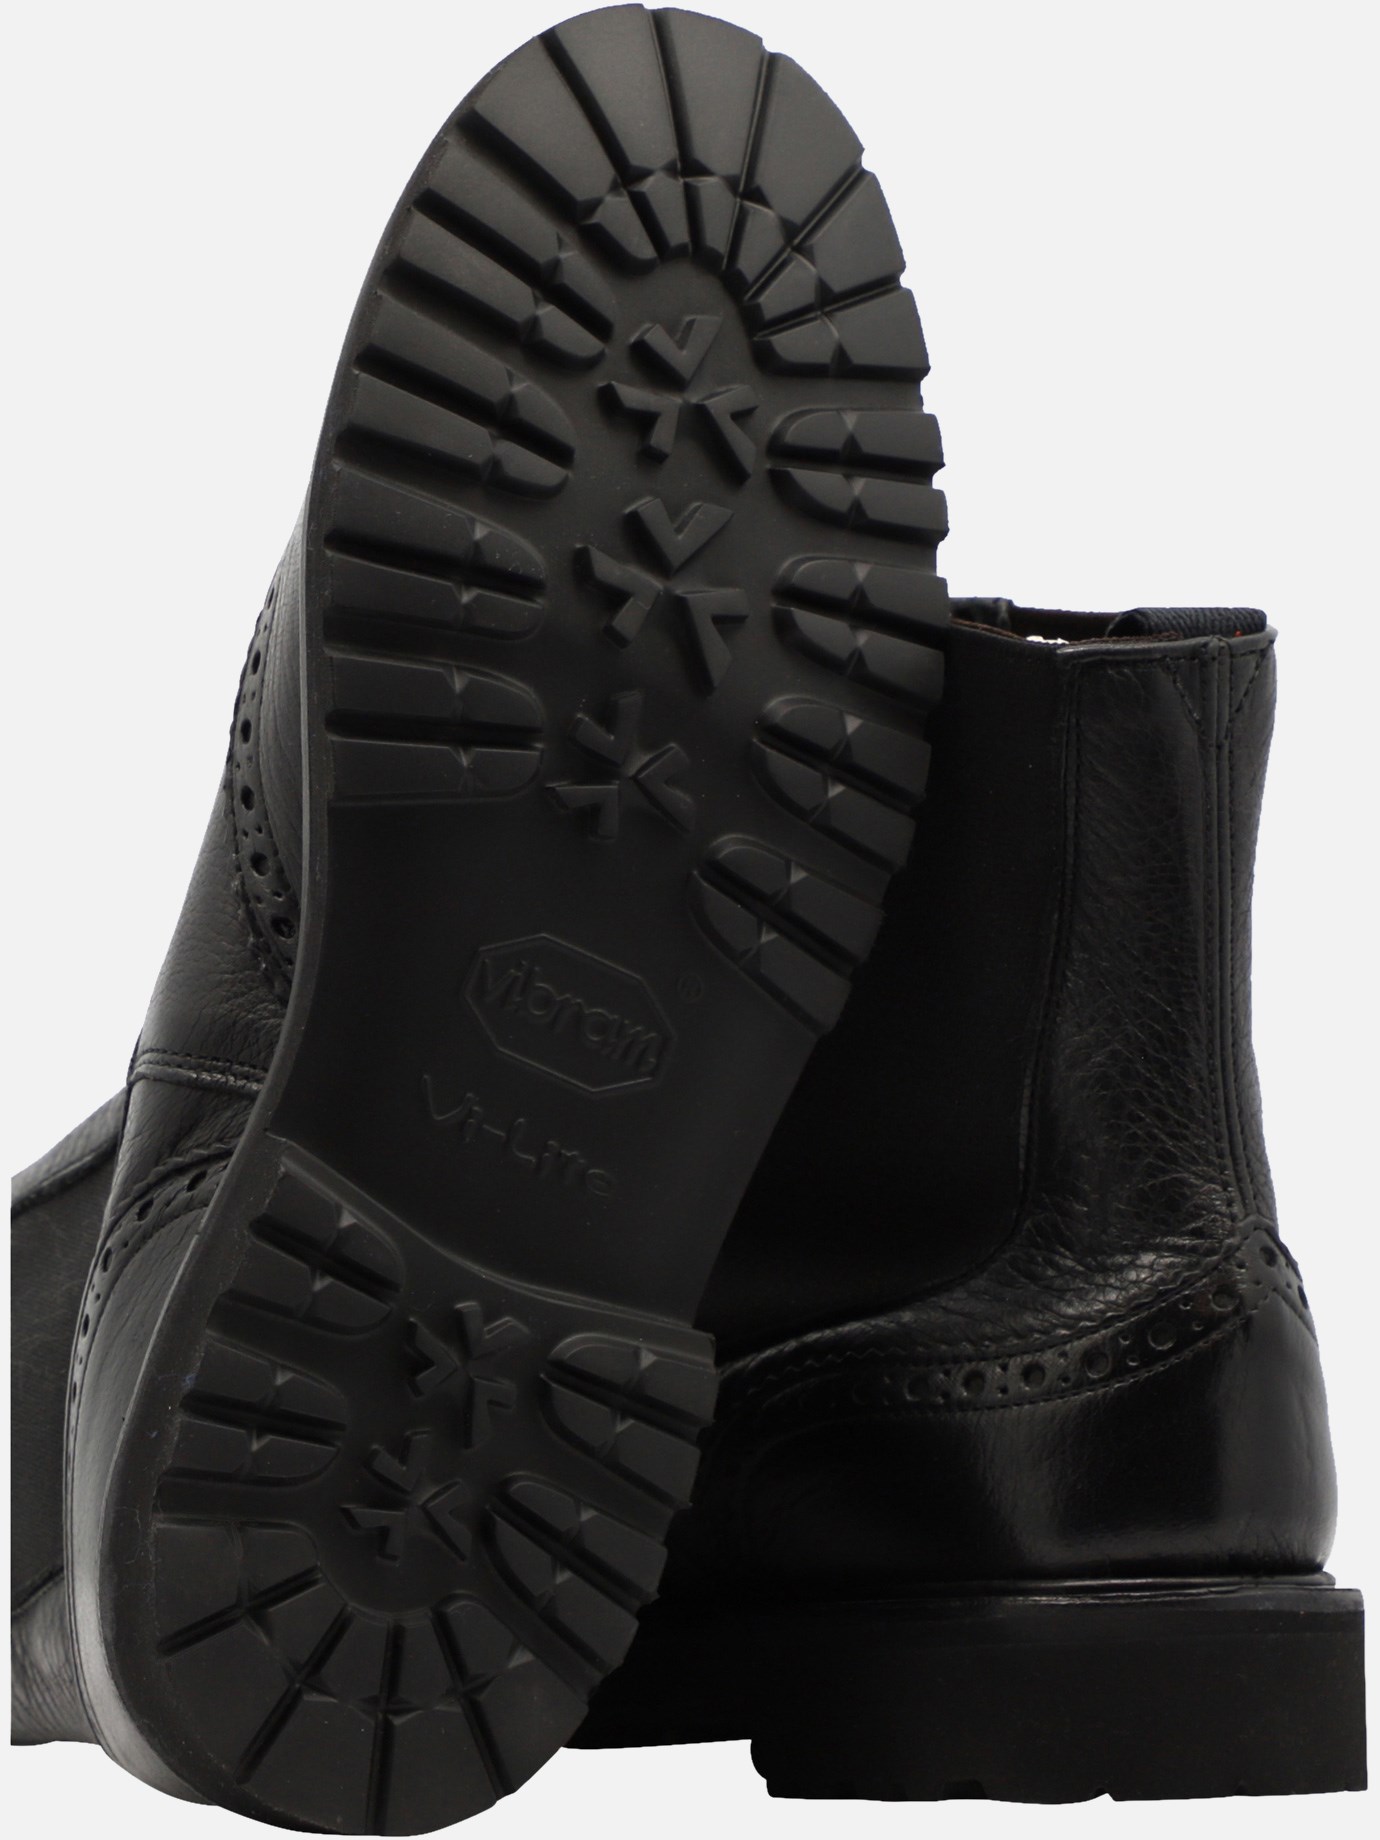  Silvia  ankle boots by Tricker's